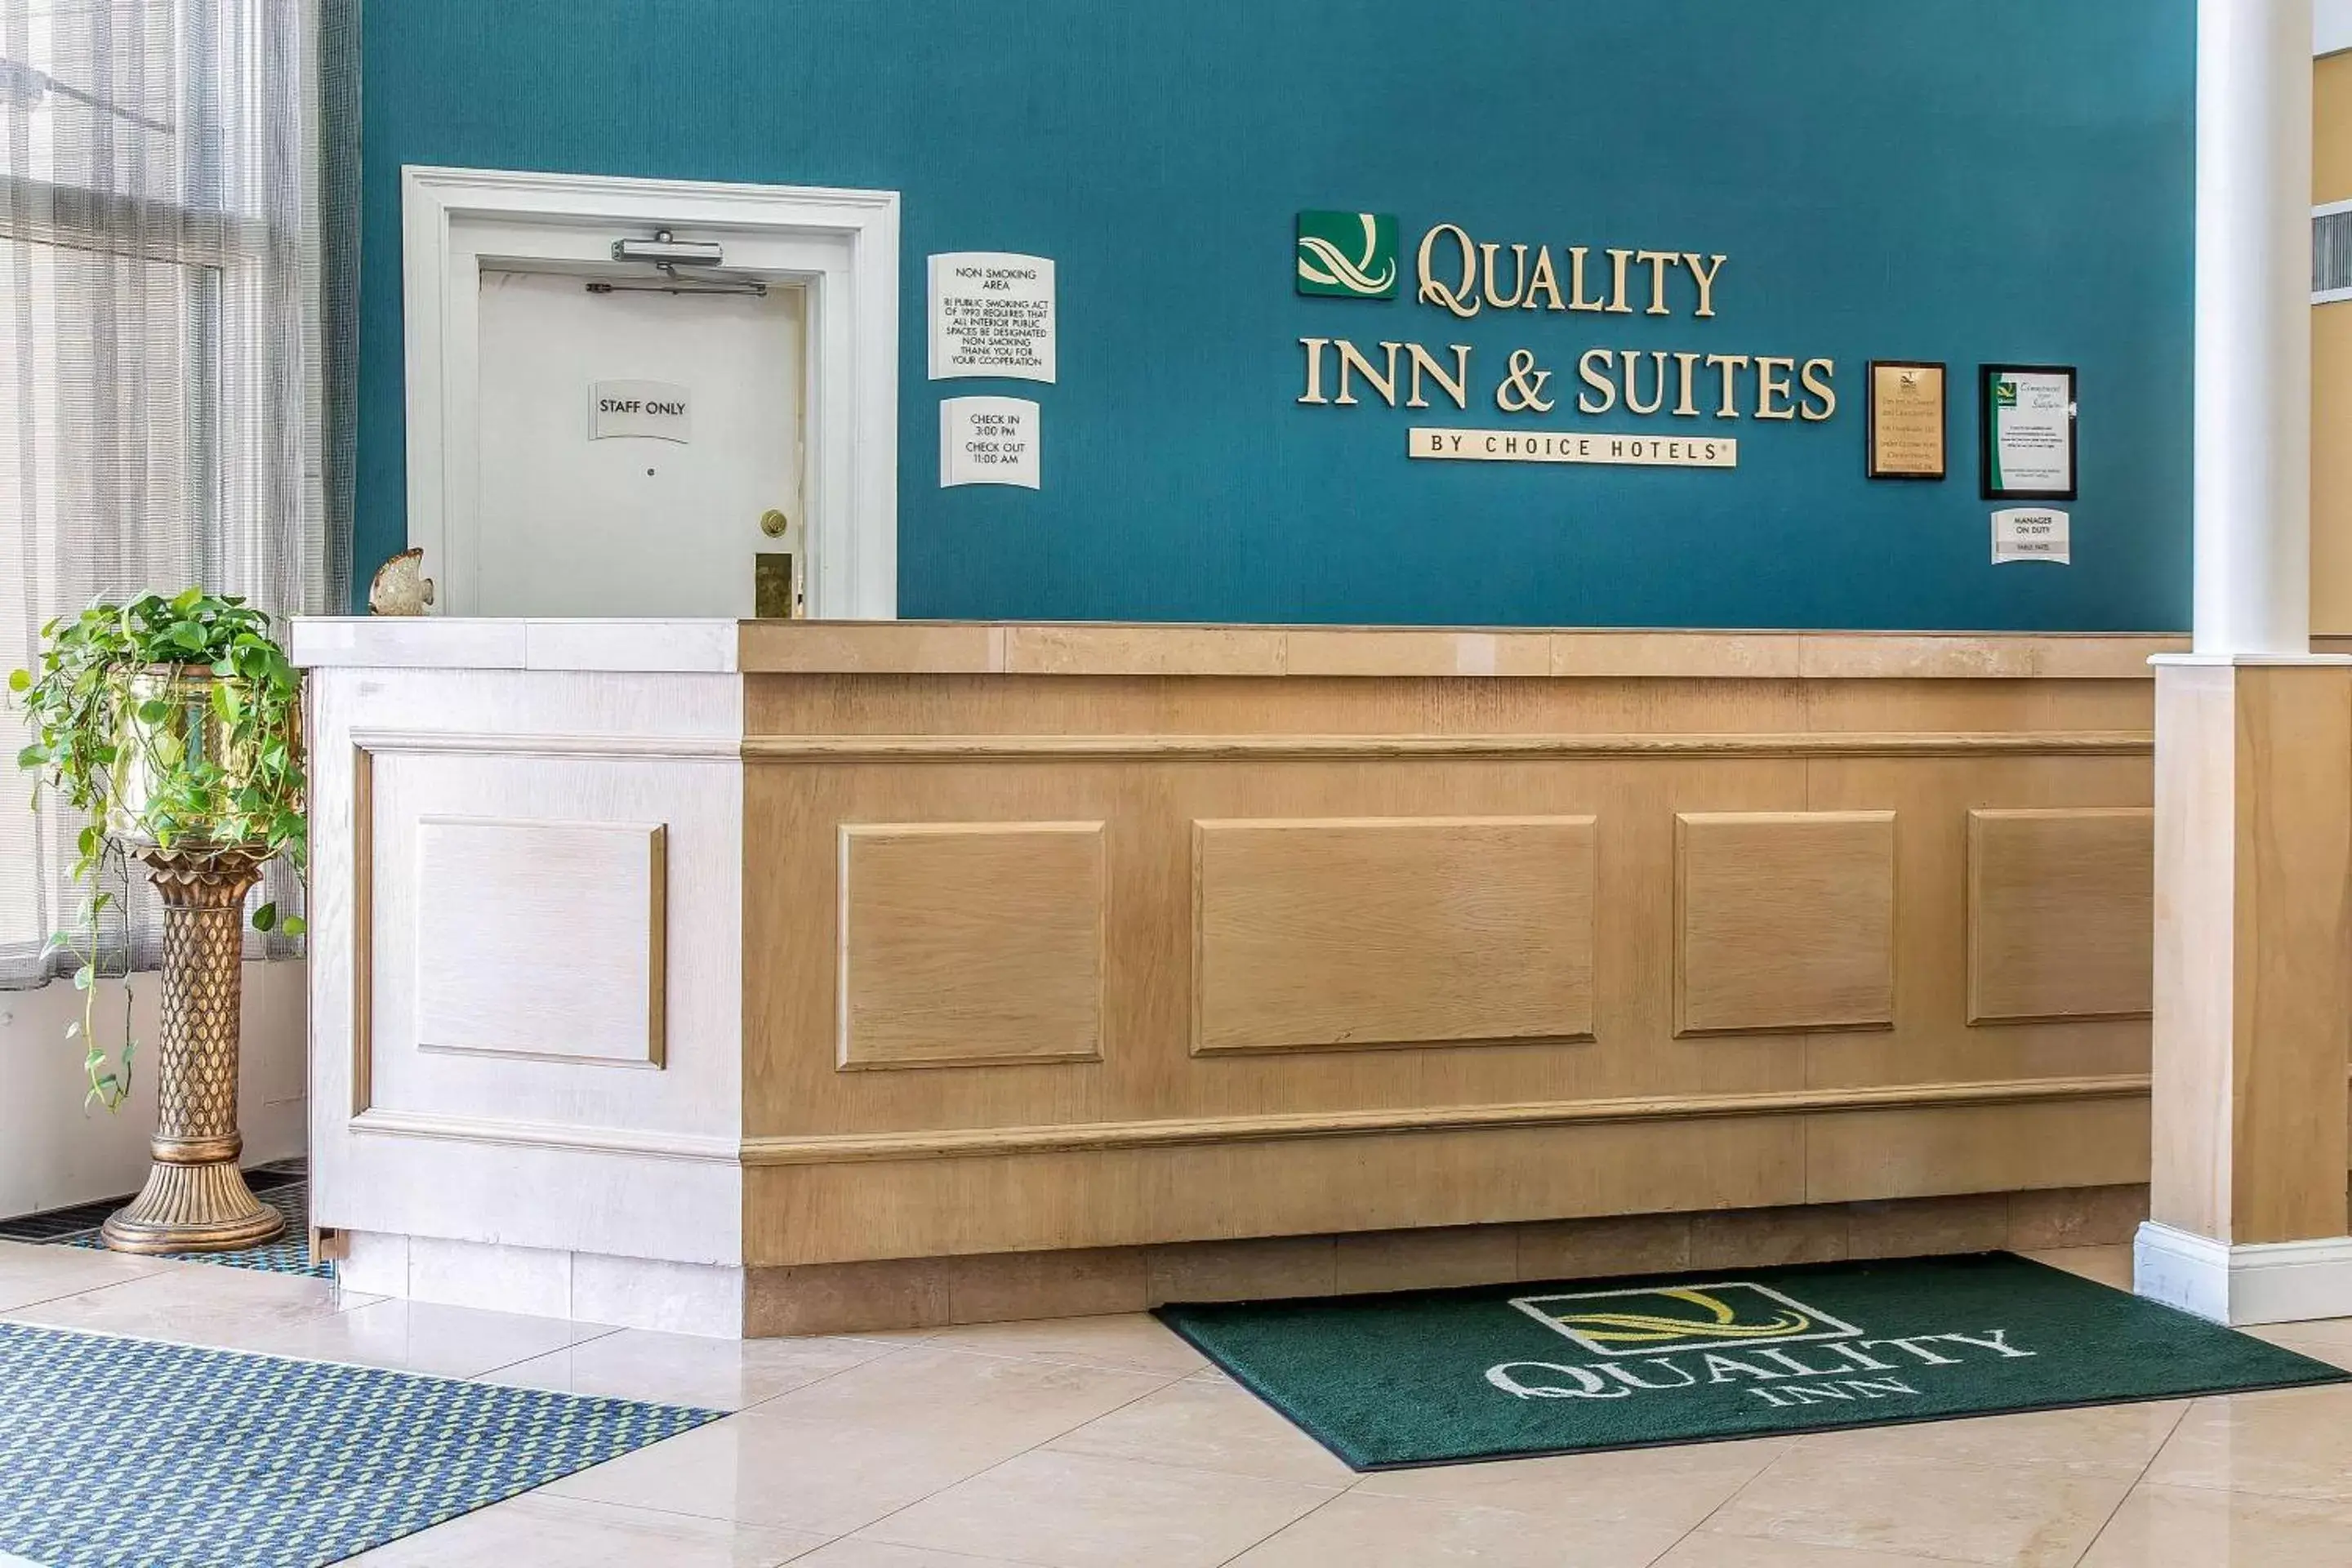 Property Logo/Sign in Quality Inn & Suites Middletown - Newport